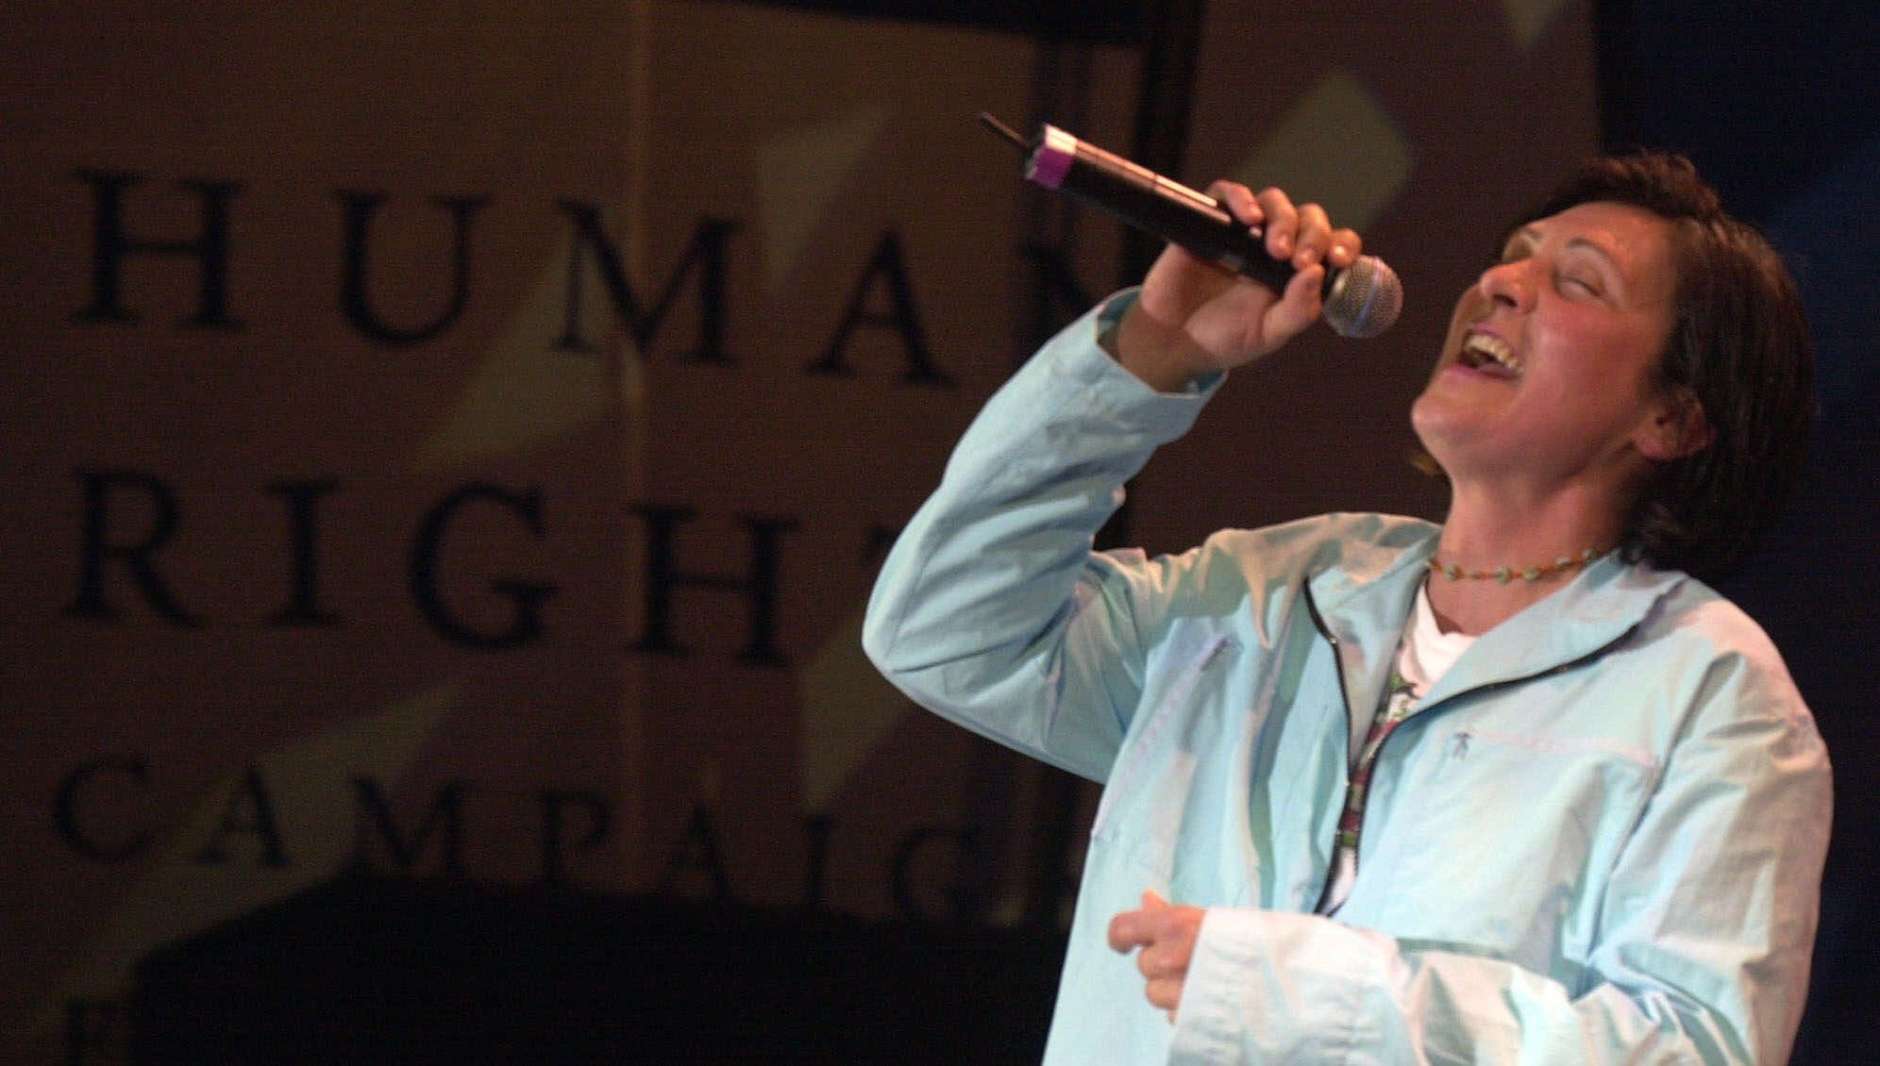 k.d. lang sings at the "Equality Rocks" concert at the RFK Stadium in Washington, Saturday April 29, 2000. The concert was held to raise awareness for the Human Rights Campaign, a gay rights organization that is co-sponsoring Sunday's Millennium March on the National Mall. (AP Photo/Linda Spillers)